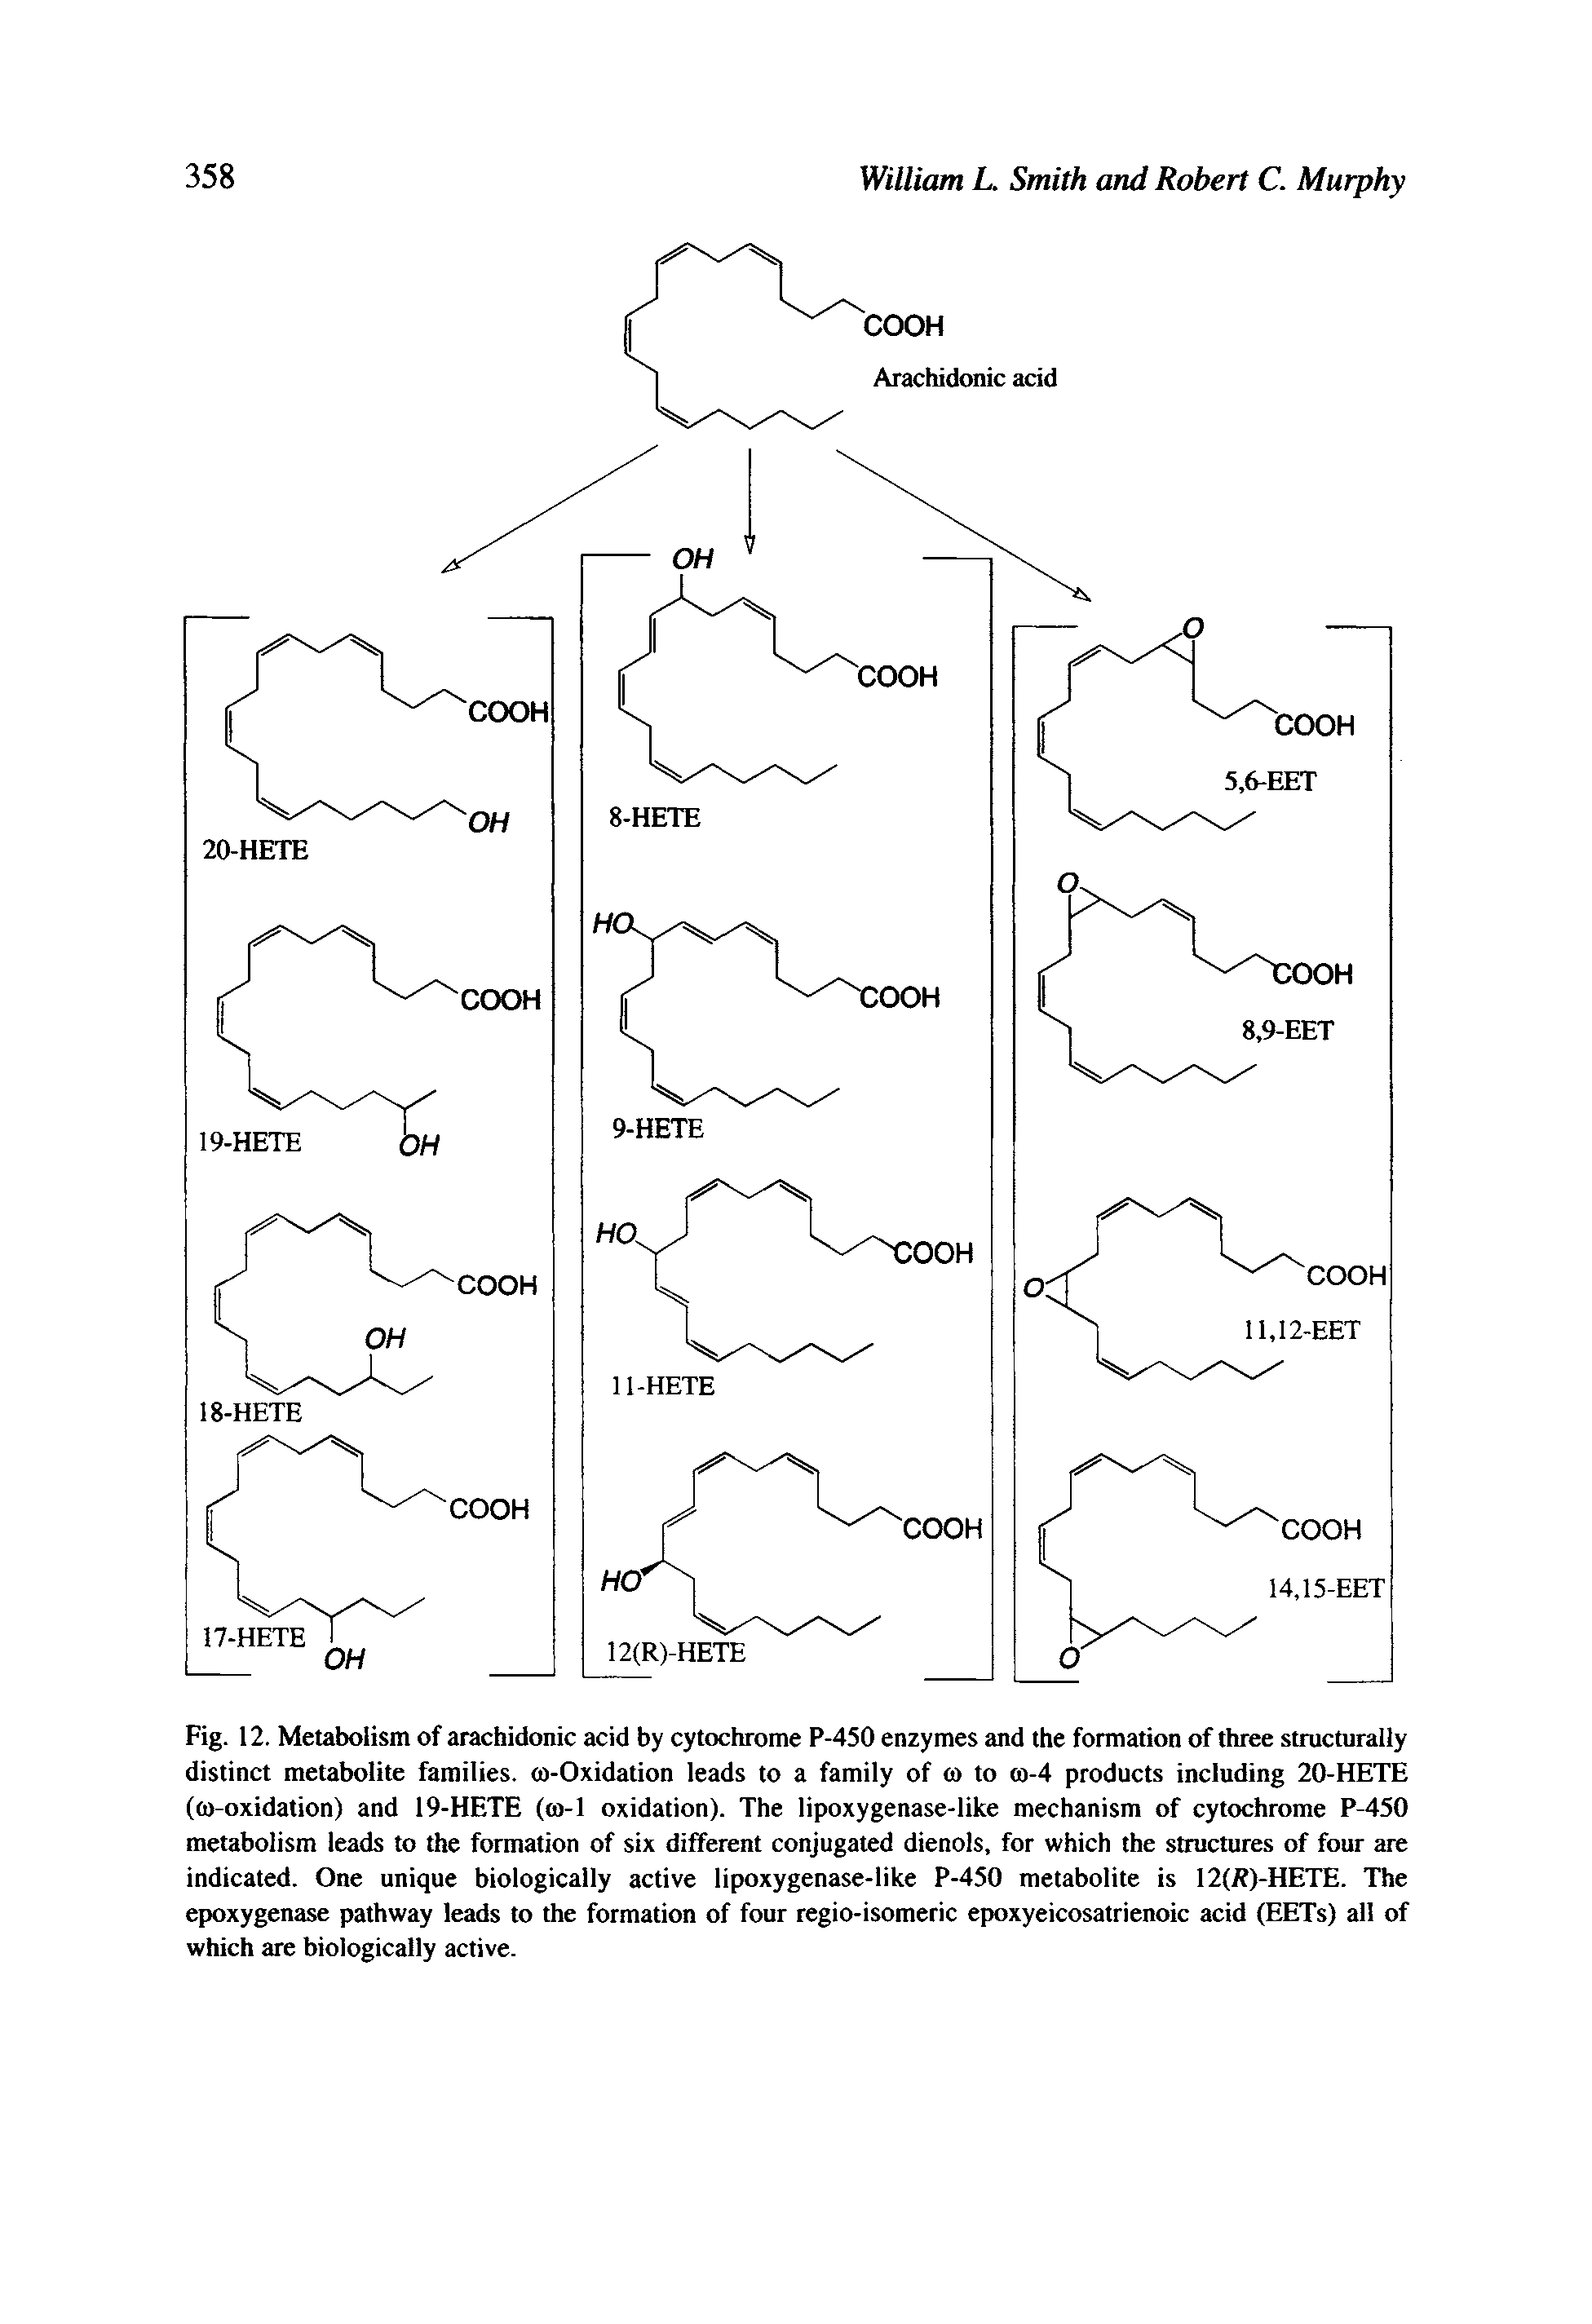 Fig. 12. Metabolism of arachidonic acid by cytochrome P-450 enzymes and the formation of three structurally distinct metabolite families. <o-Oxidation leads to a family of to to w-4 products including 20-HETE ((o-oxidation) and 19-HETE (co-1 oxidation). The lipoxygenase-like mechanism of cytochrome P-450 metabolism leads to the formation of six different conjugated dienols, for which the structures of four are indicated. One unique biologically active lipoxygenase-like P-450 metabolite is 12(/f)-HETE. The epoxygenase pathway leads to the formation of four regio-isomeric epoxyeicosatrienoic acid (EETs) all of which are biologically active.